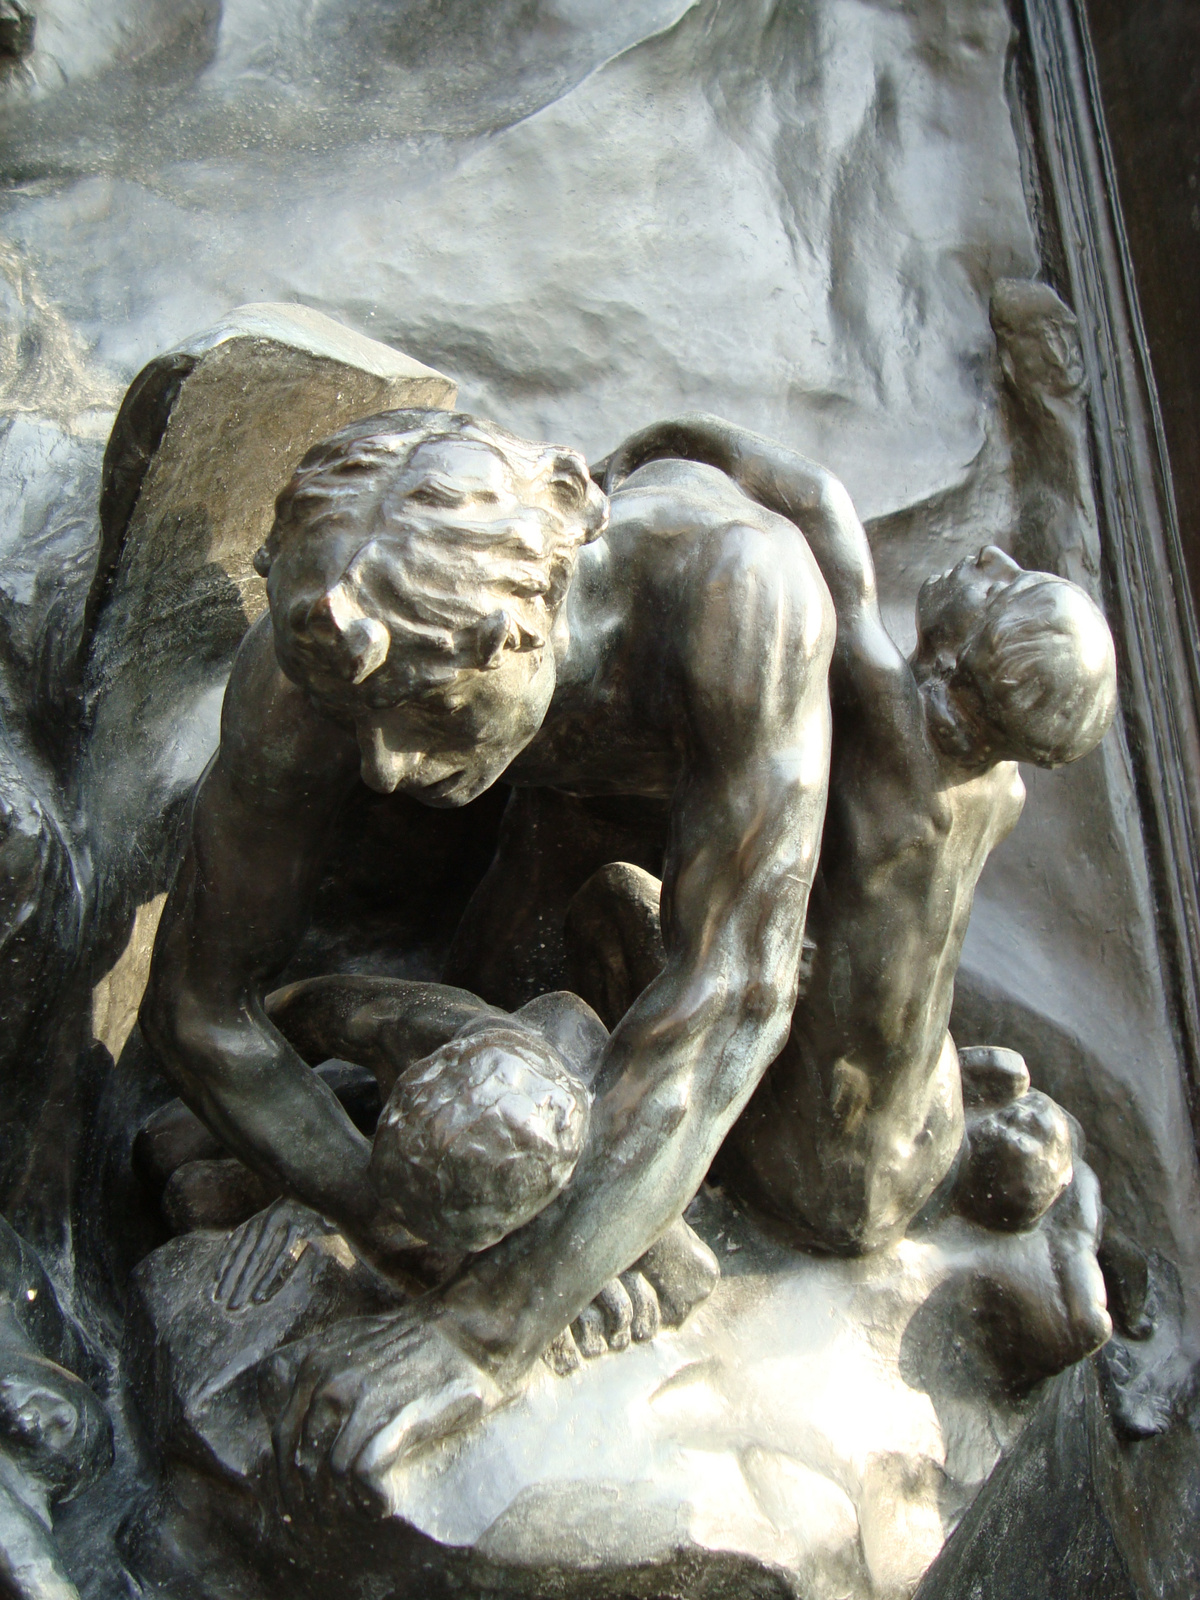 Auguste-Rodin-The-Gates-of-Hell-detal-Ugolino-at-the-Musee-Rodi